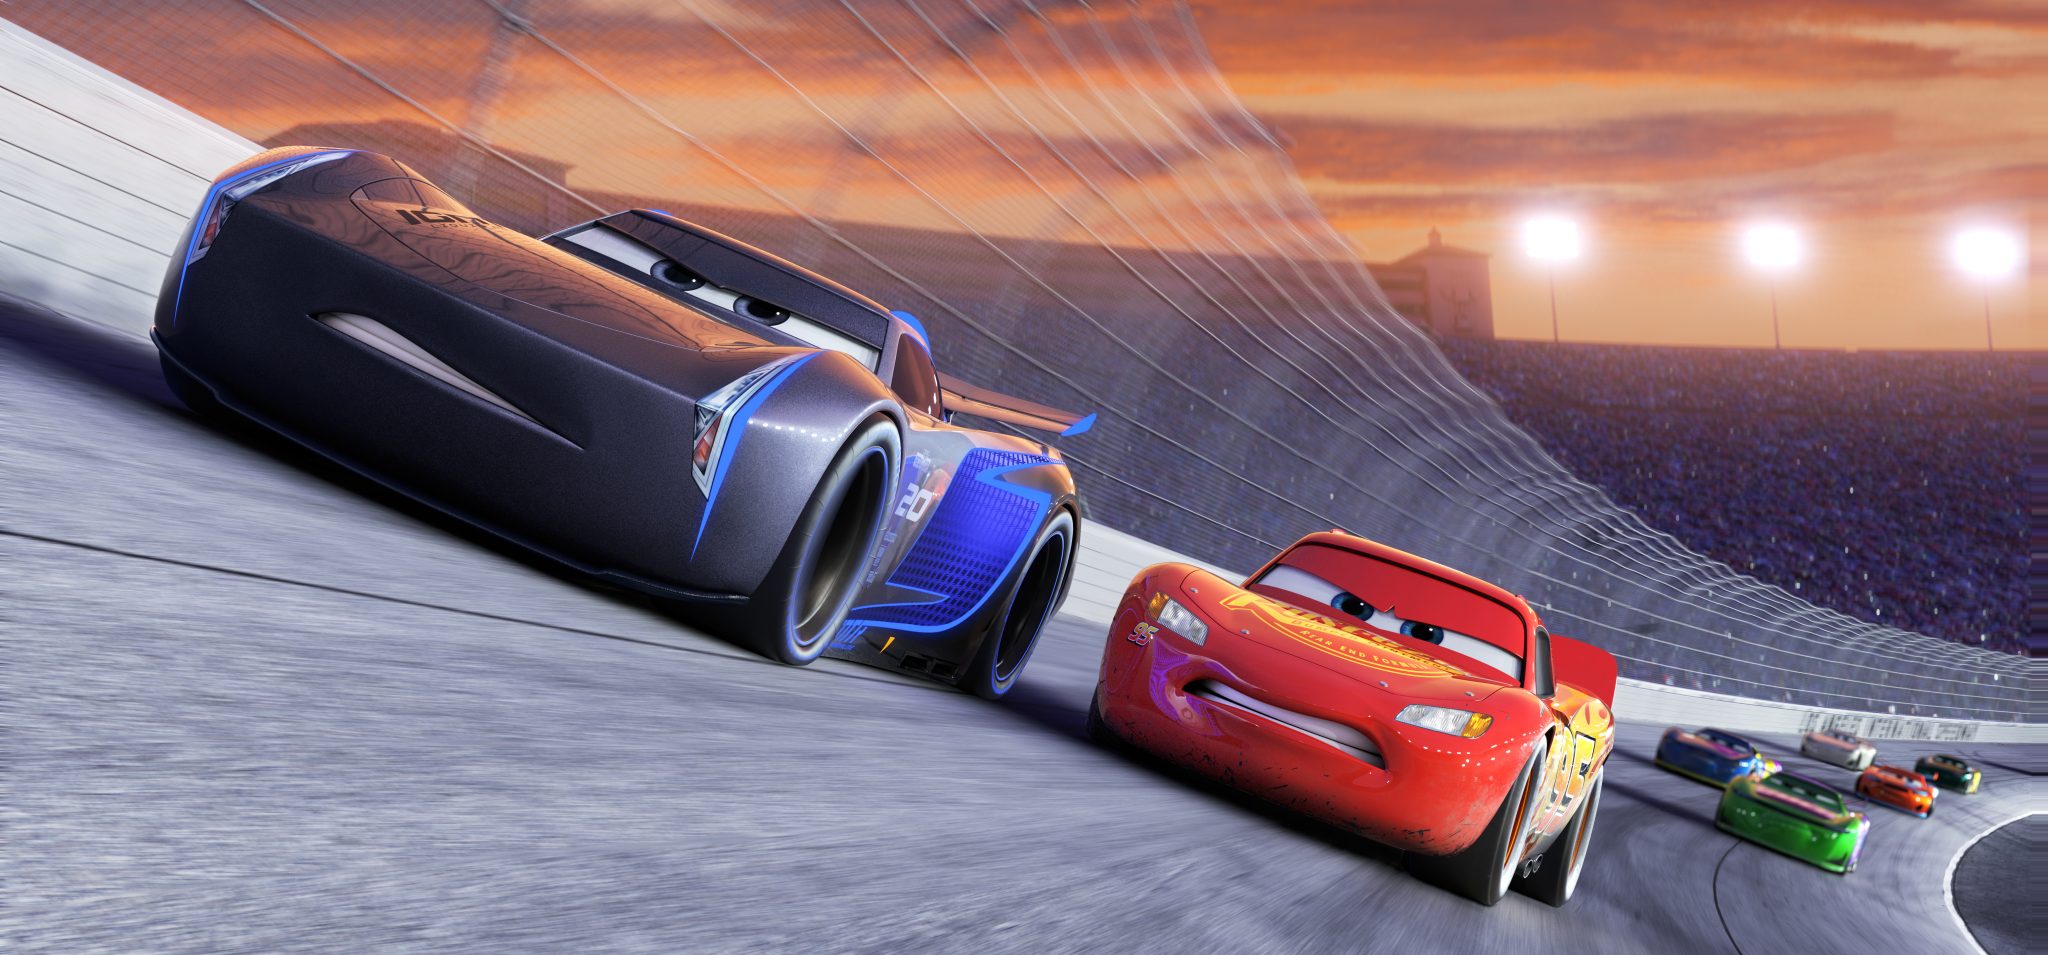 New Cars 3 Trailer Shows Lightning Up Against Next Generation of Racers